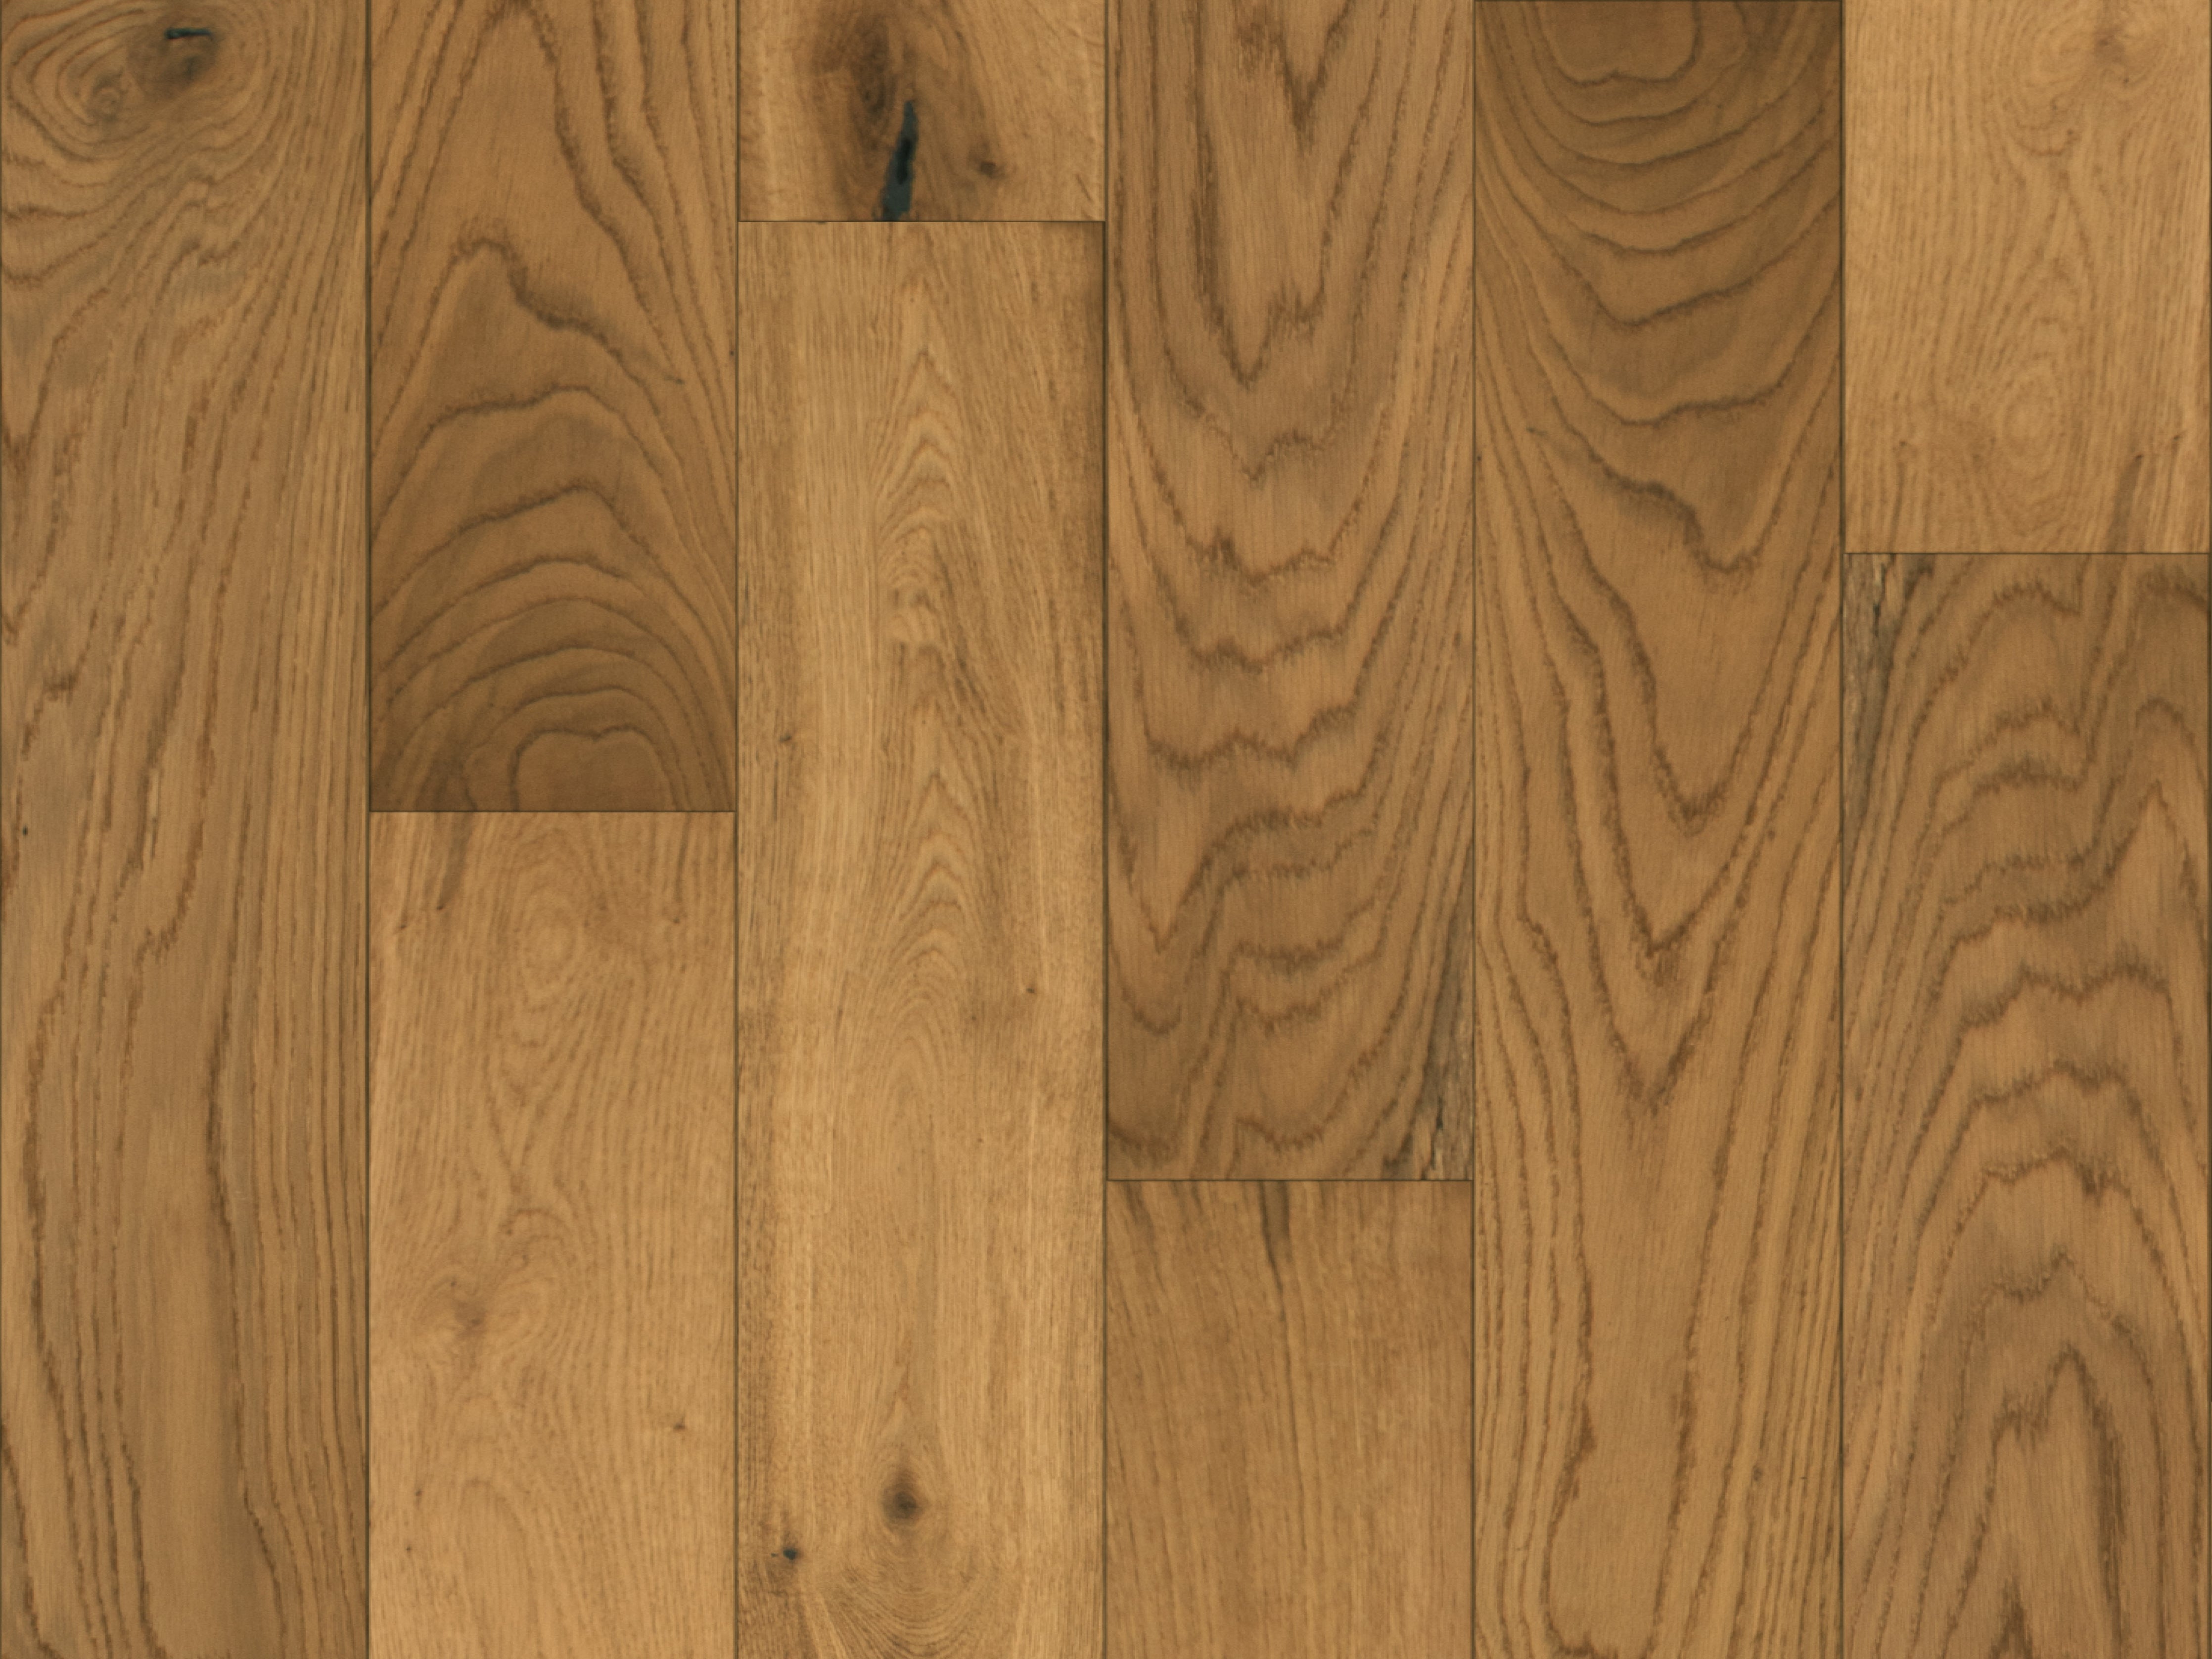 duchateau the guild lineage riley european oak engineered hardnatural wood floor uv lacquer finish for interior use distributed by surface group international